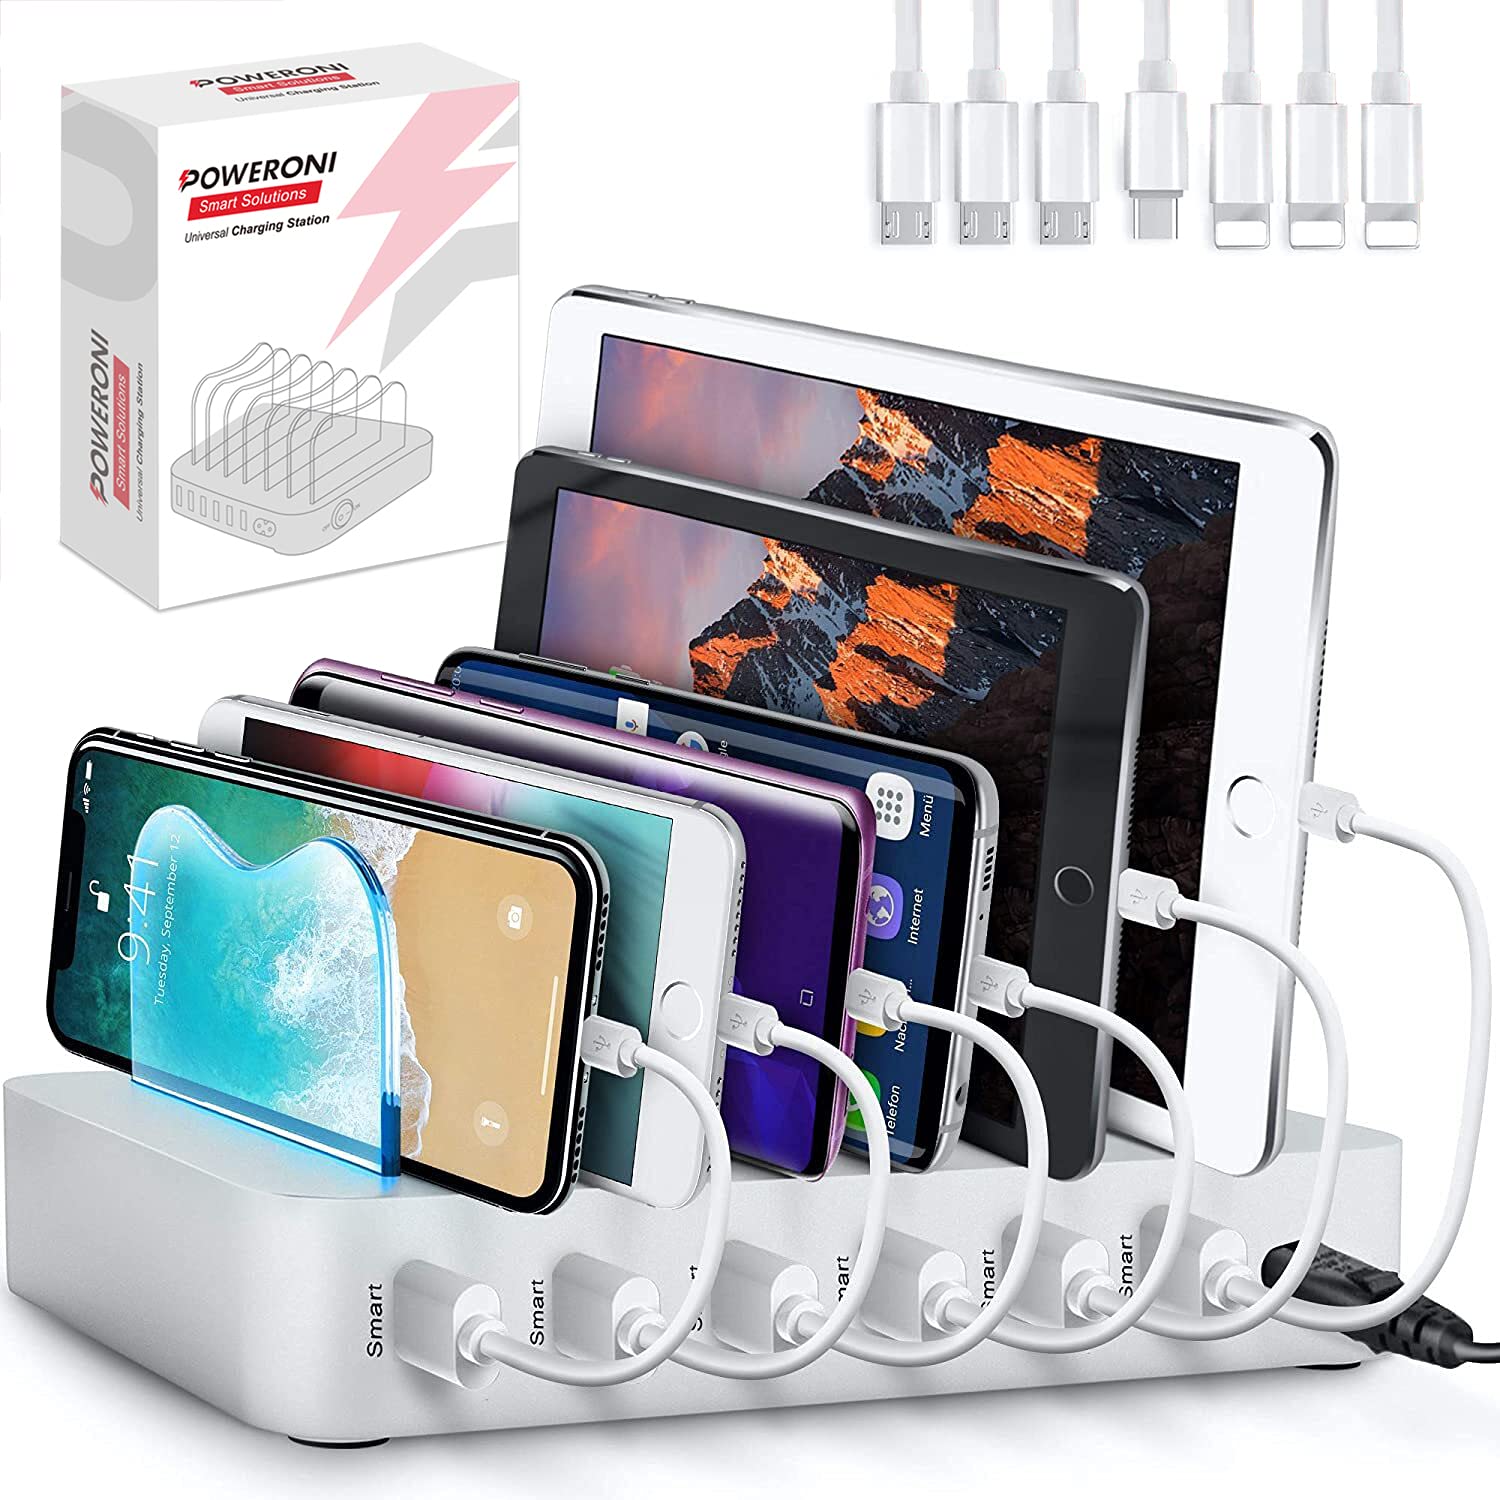 Poweroni USB Charging Dock - 6-Port - Fast Charging Station for Multiple Devices Apple - Multi Phone Charger Station - Charging Station - for Apple iPad iPhone and Android Cell Phone and Tablet  - Like New